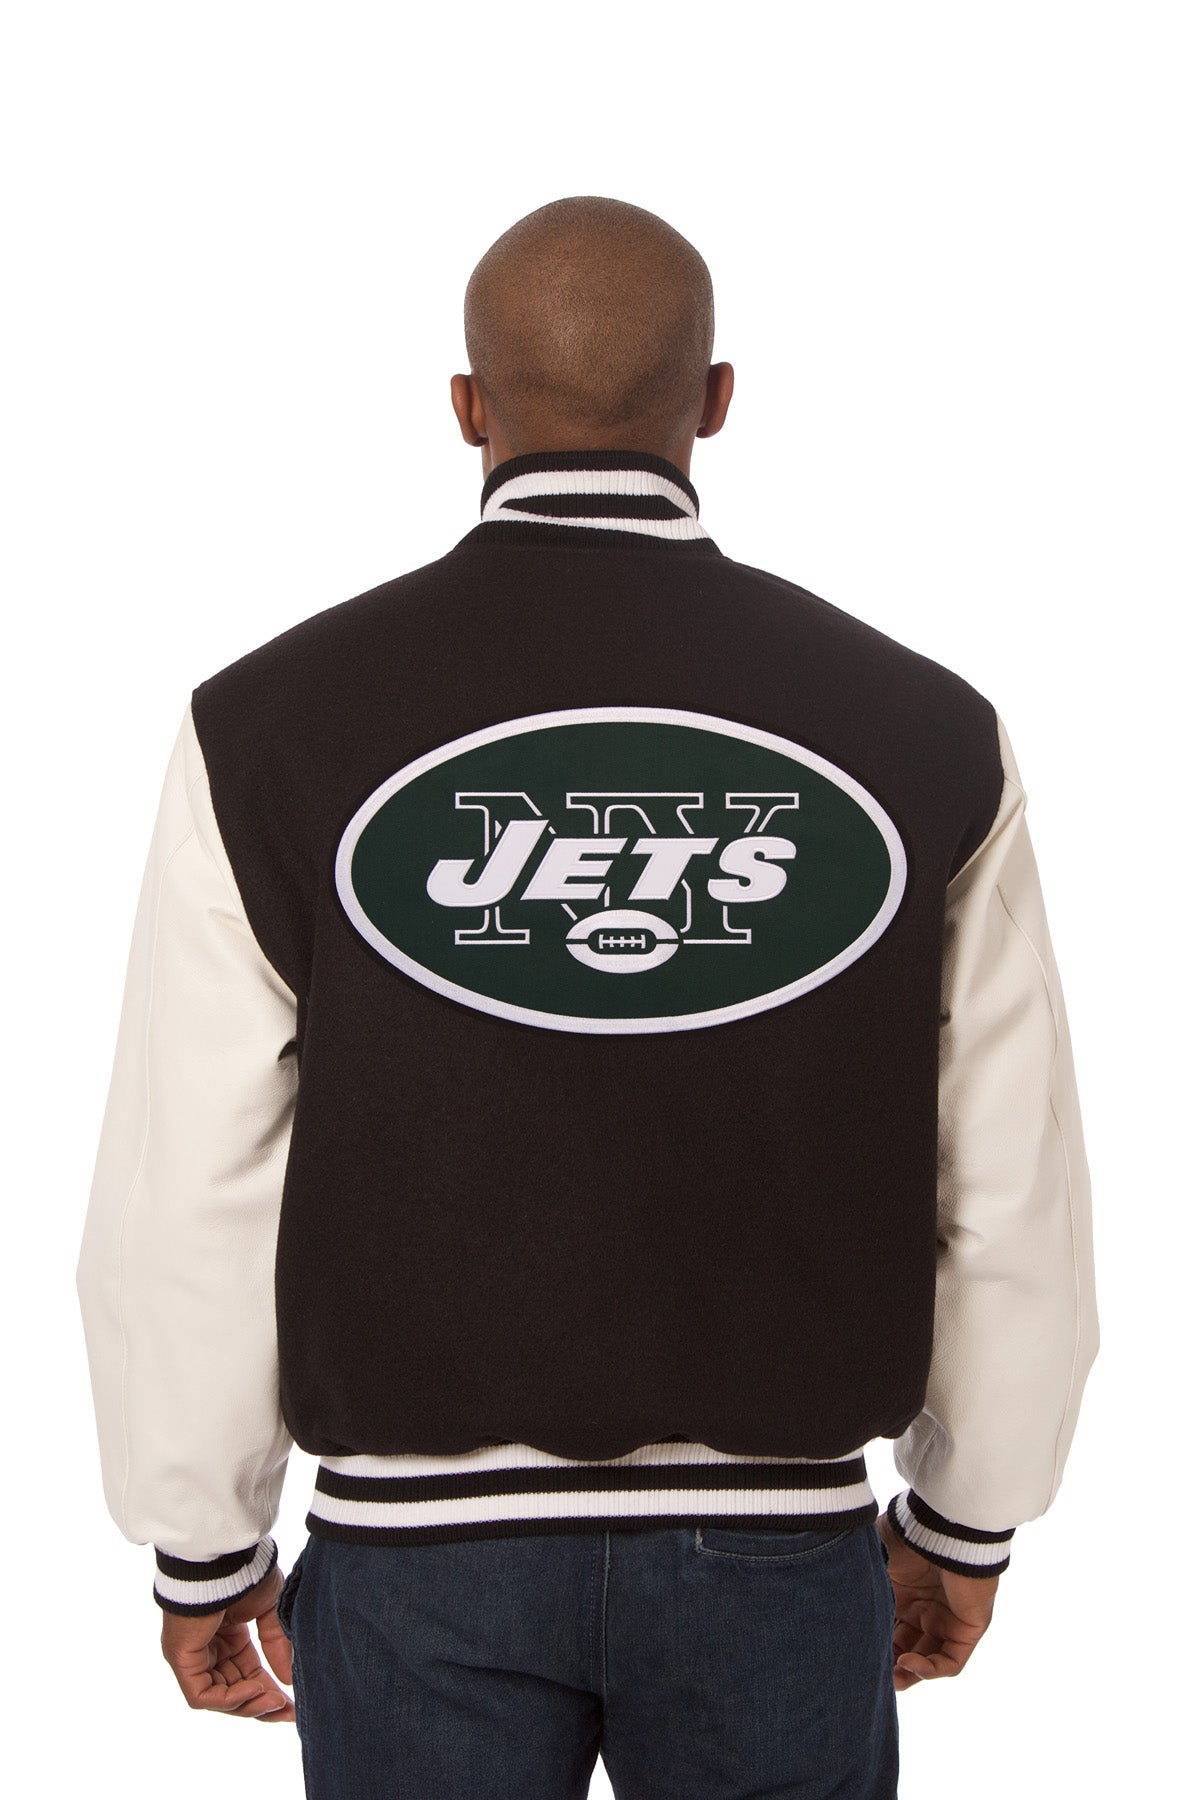 New York Jets Embroidered Wool and Leather Jacket